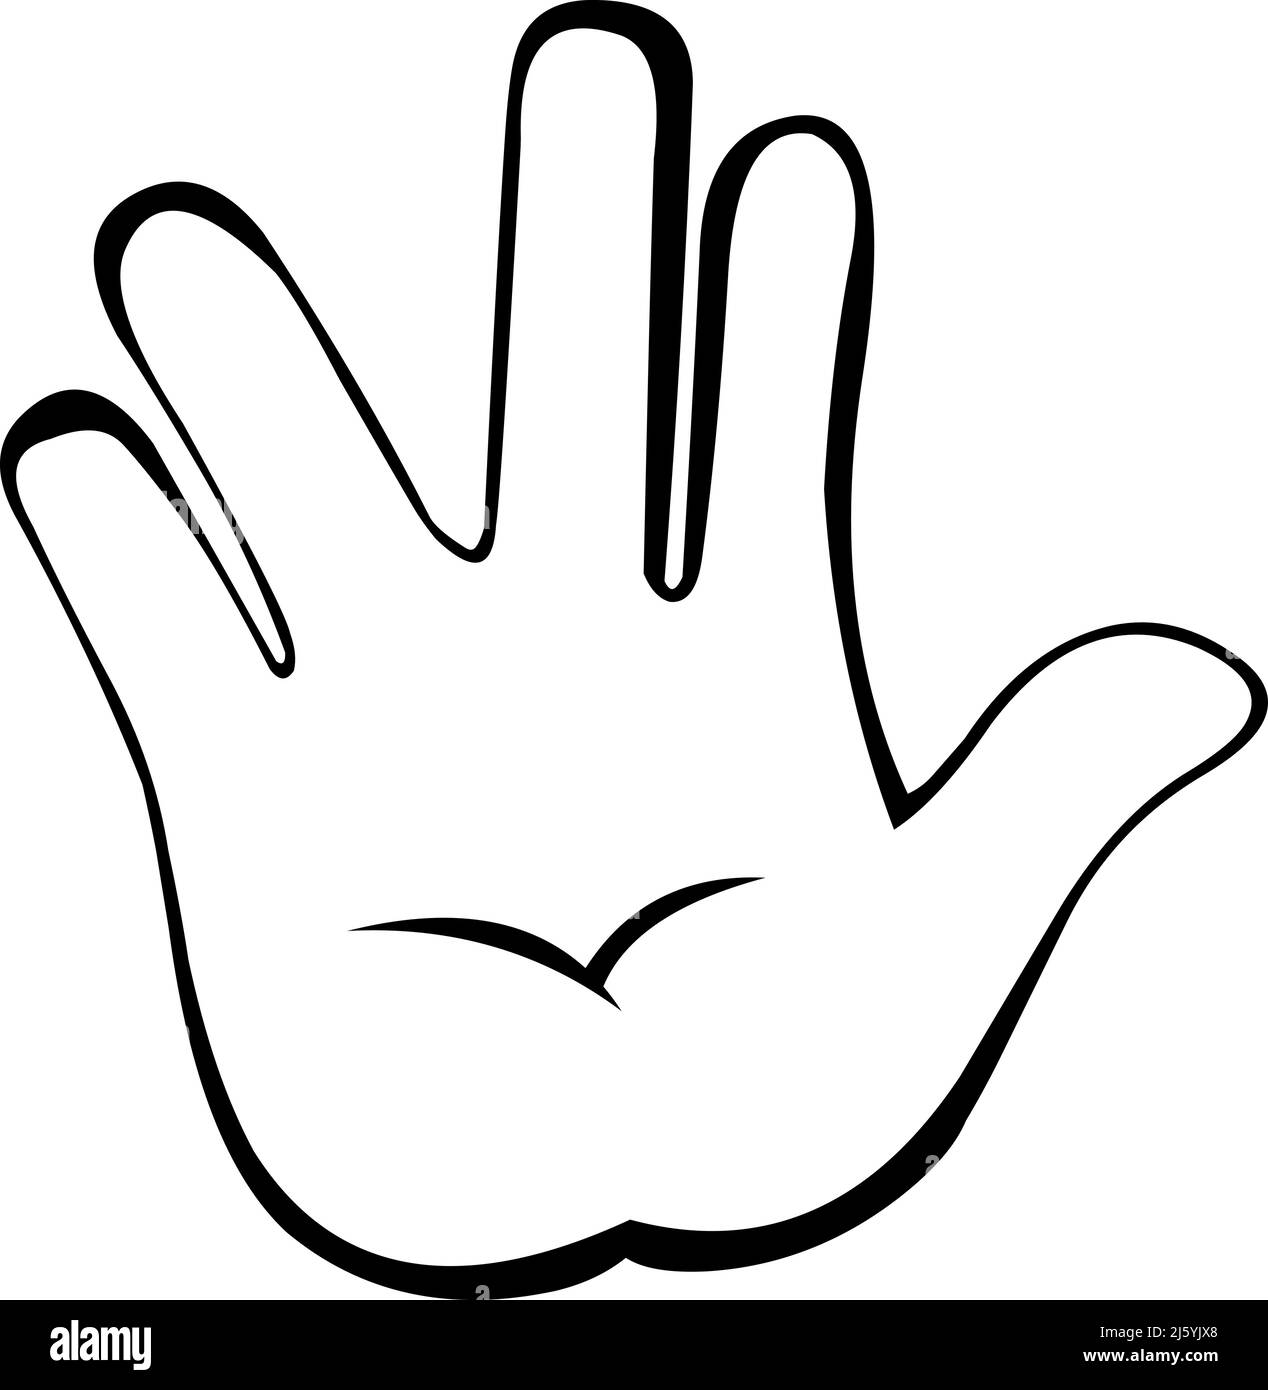 Vector illustration of a hand doing the vulcan salute, drawn in black and white Stock Vector